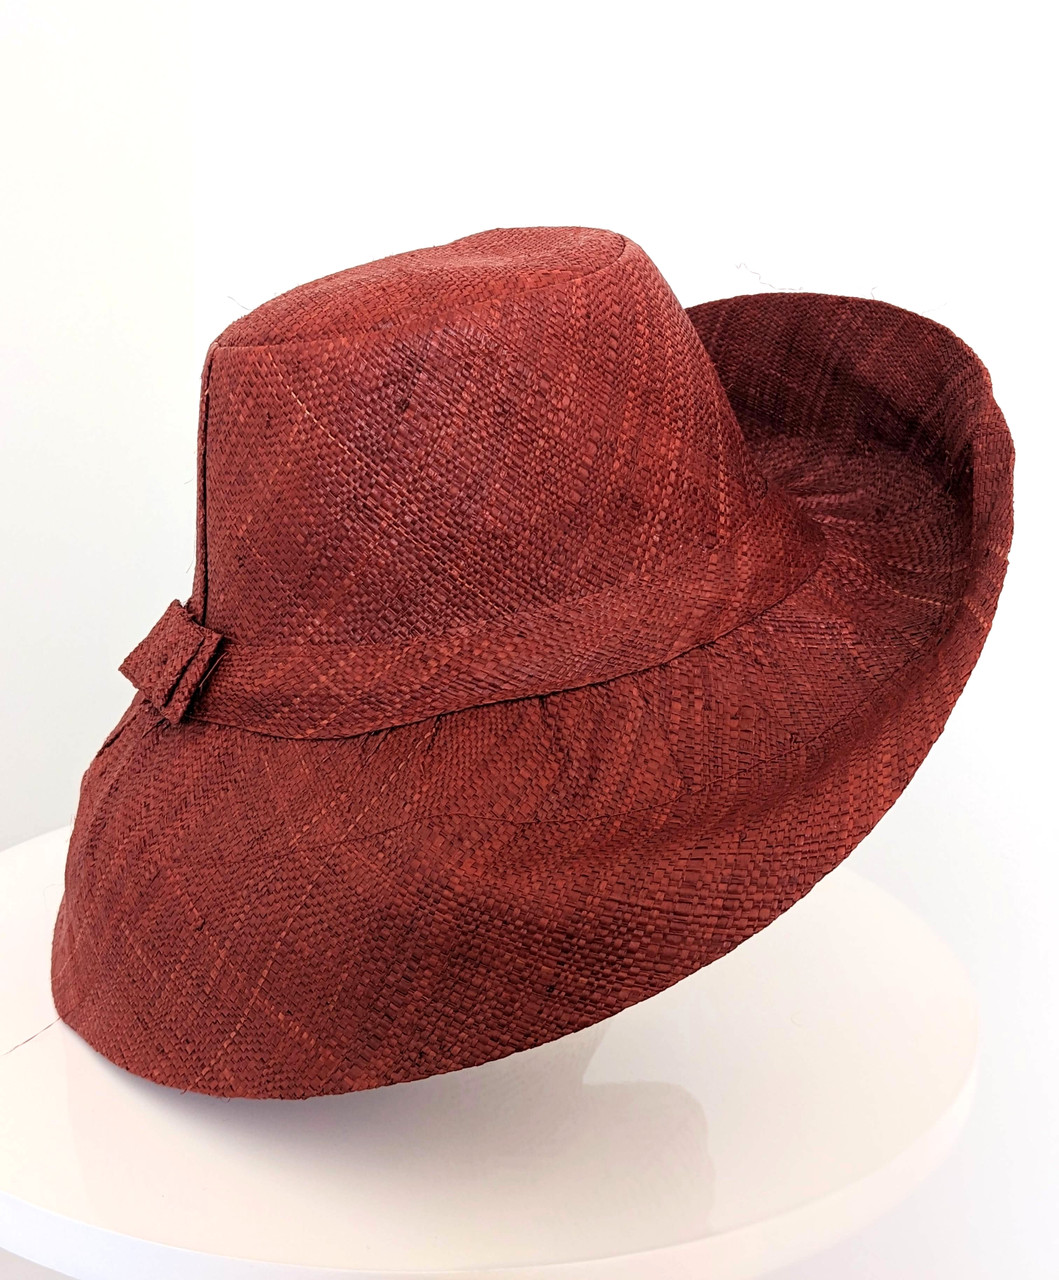 Raffia Straw Lightweight Breathable Stripes Sun Hat, Made in Madagascar  Rust Red - Frost Hats